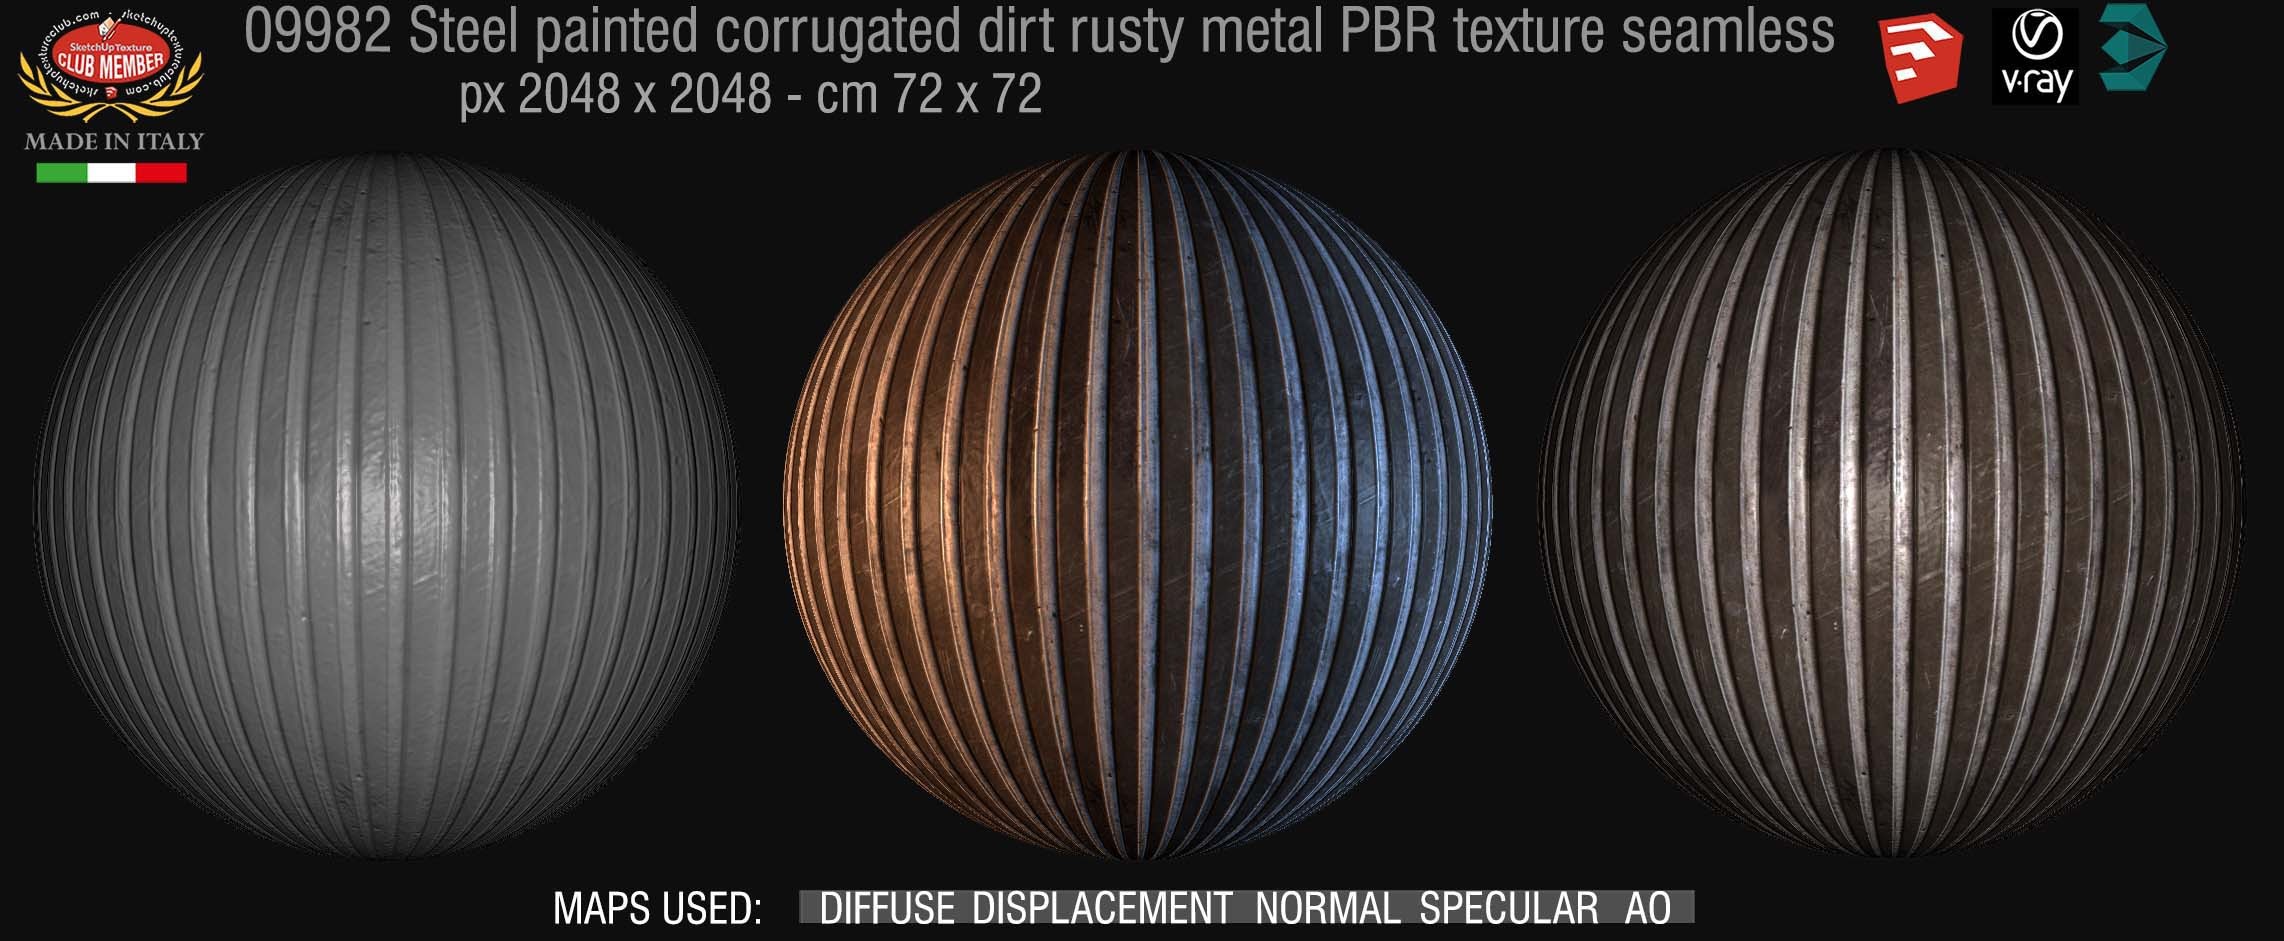 09982 Steel painted corrugated rusty metal PBR texture seamless DEMO